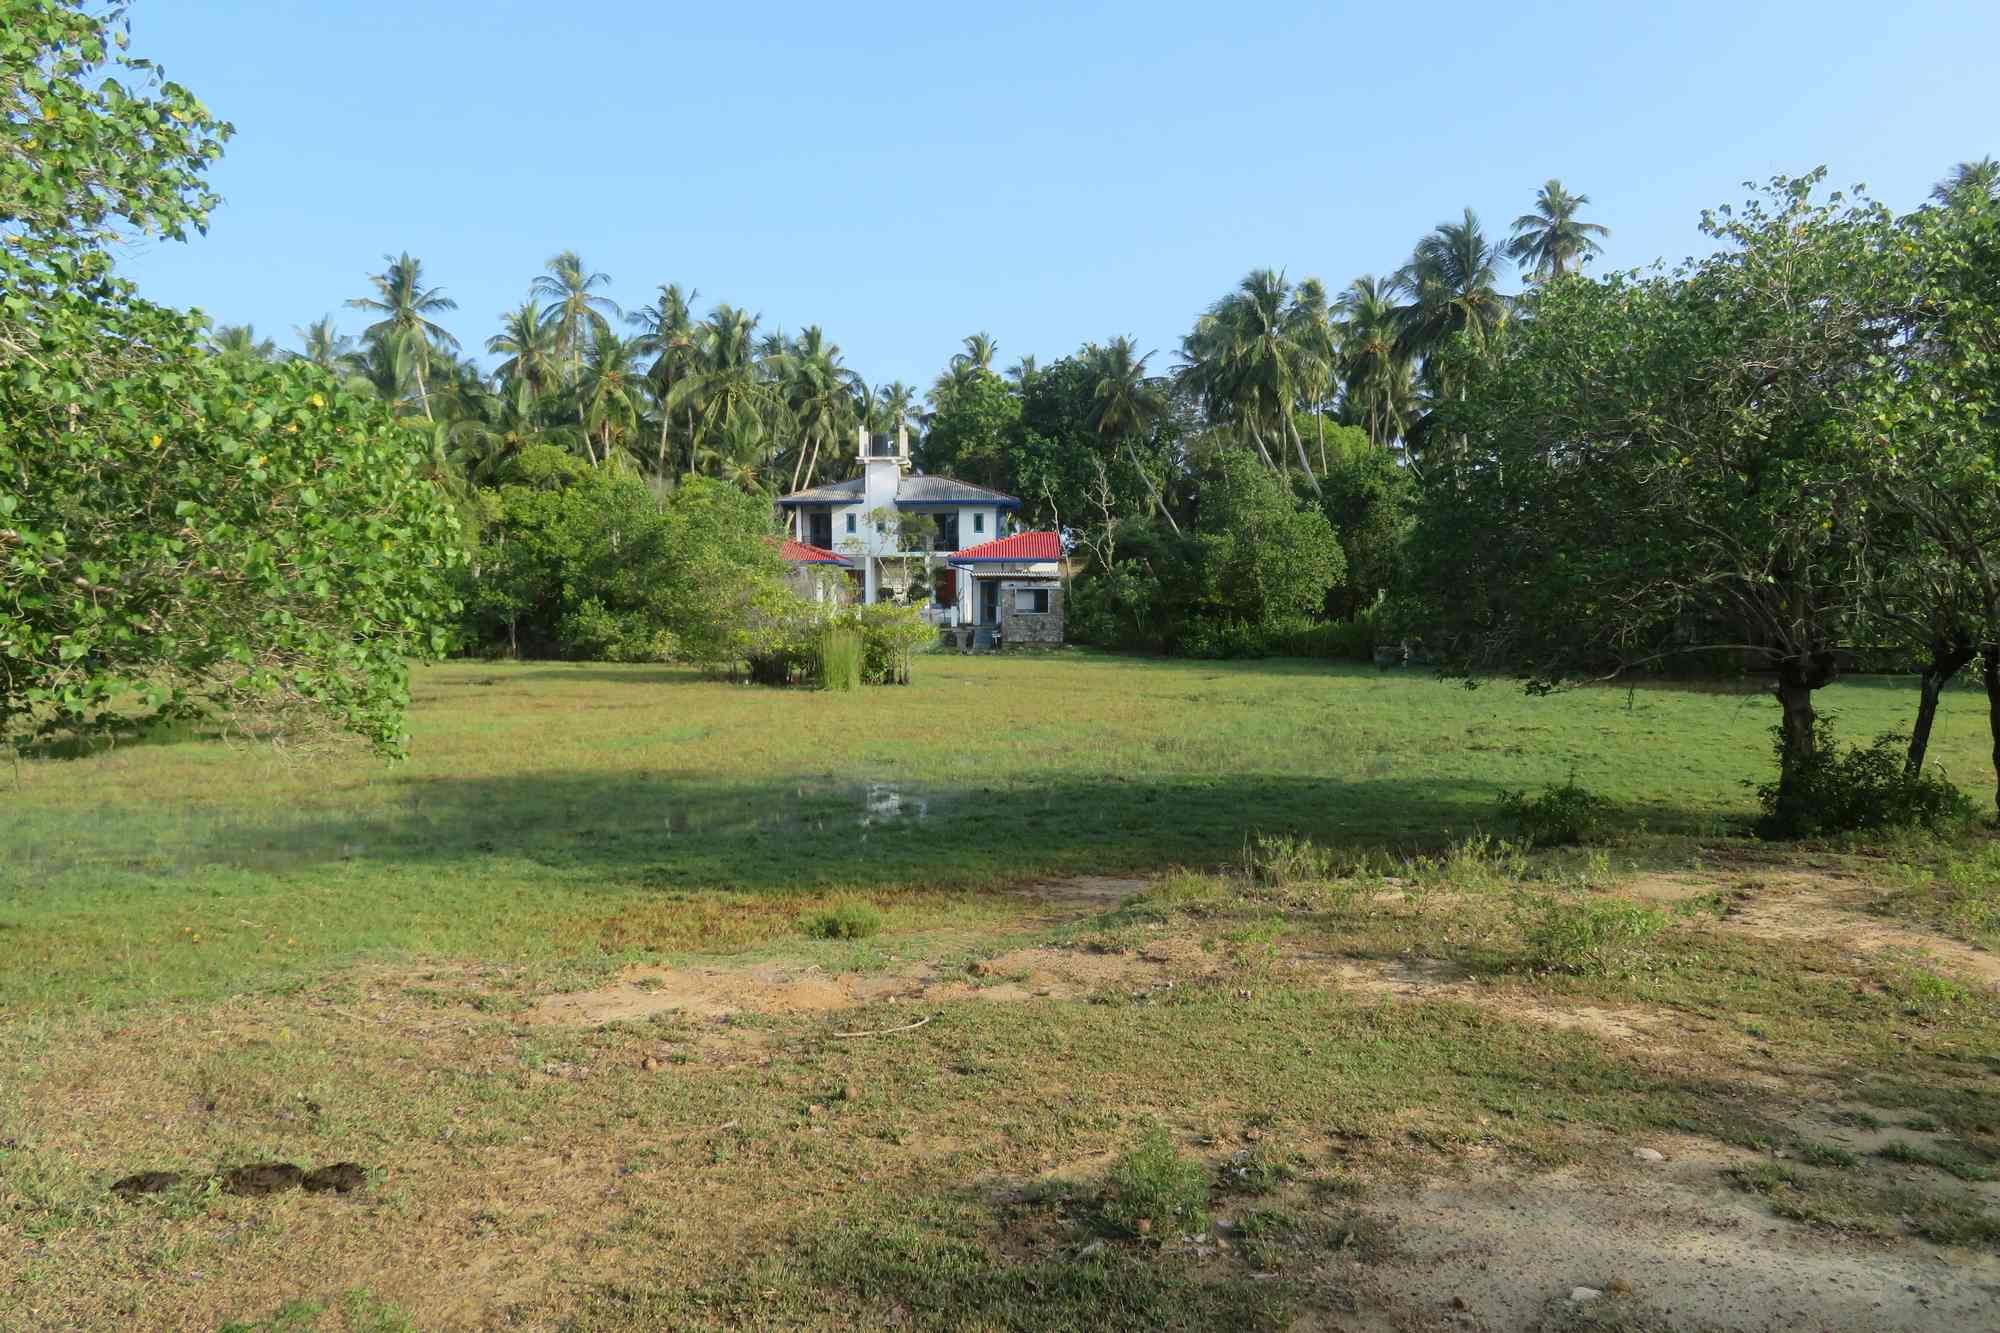 80-perch beach-by land in Kahandamodara, Tangalle for sale! Walk to the golden beach!